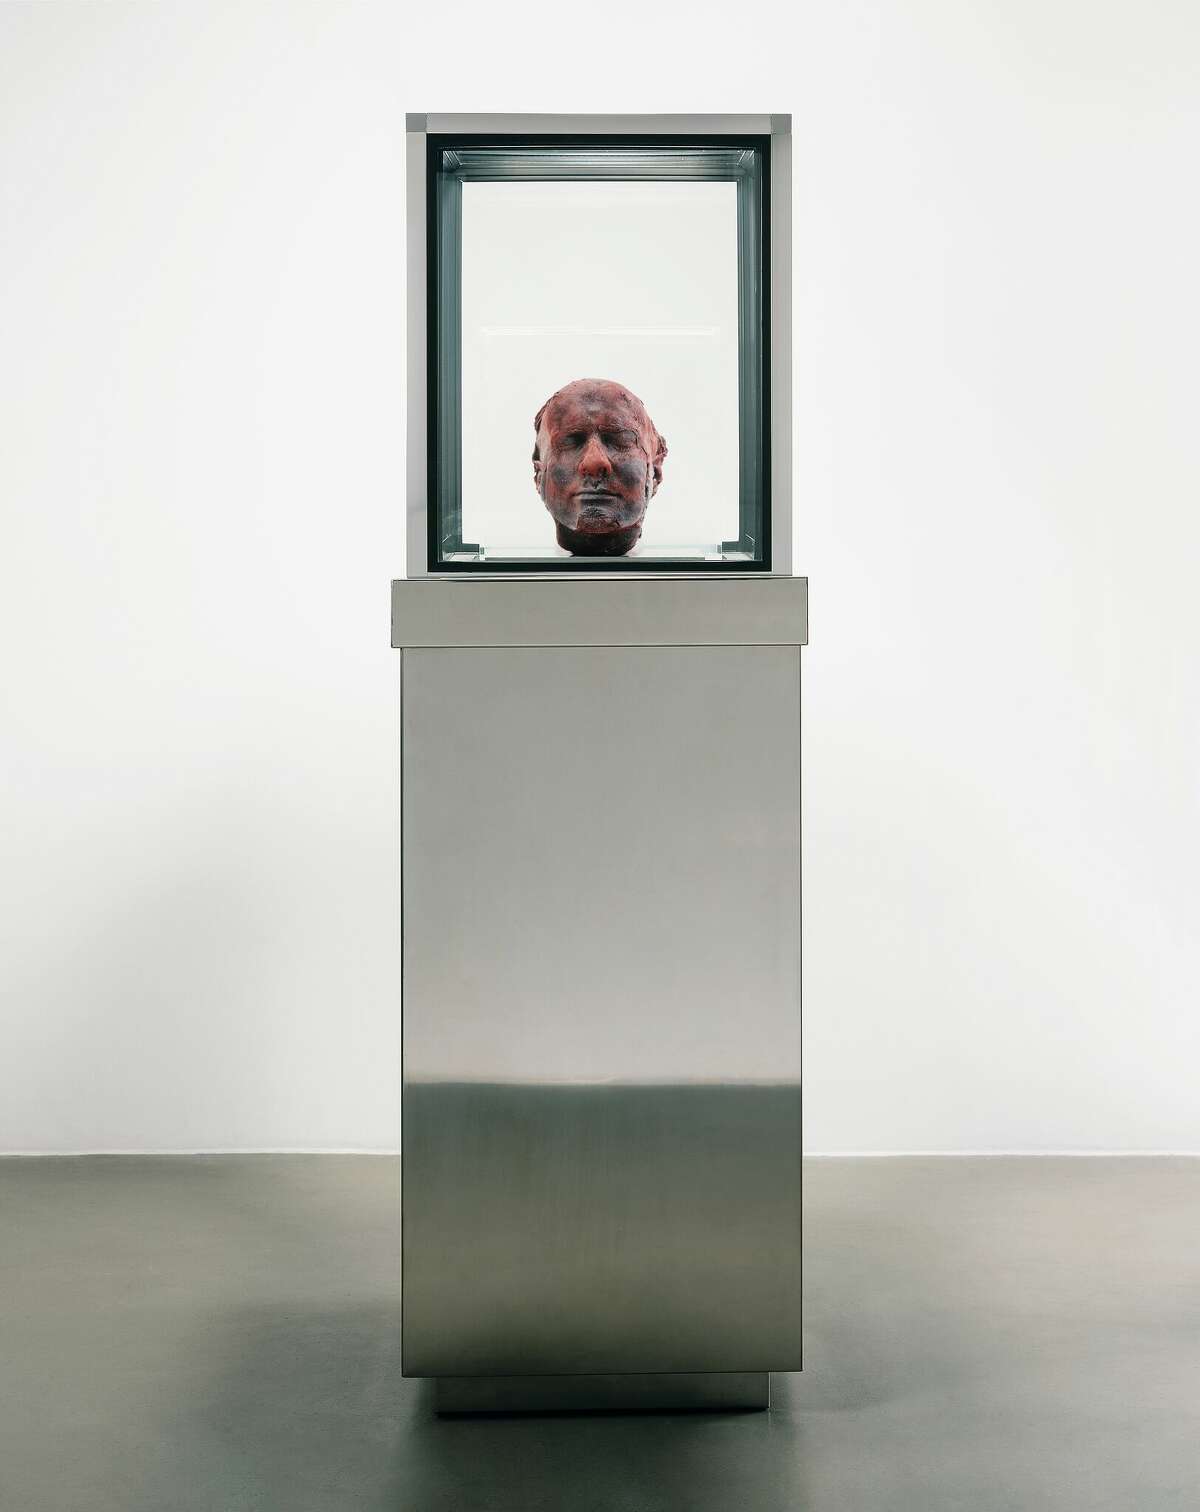 Marc Quinn's "Self 1991" is on display at the Yale Center for British Art through Oct. 16.